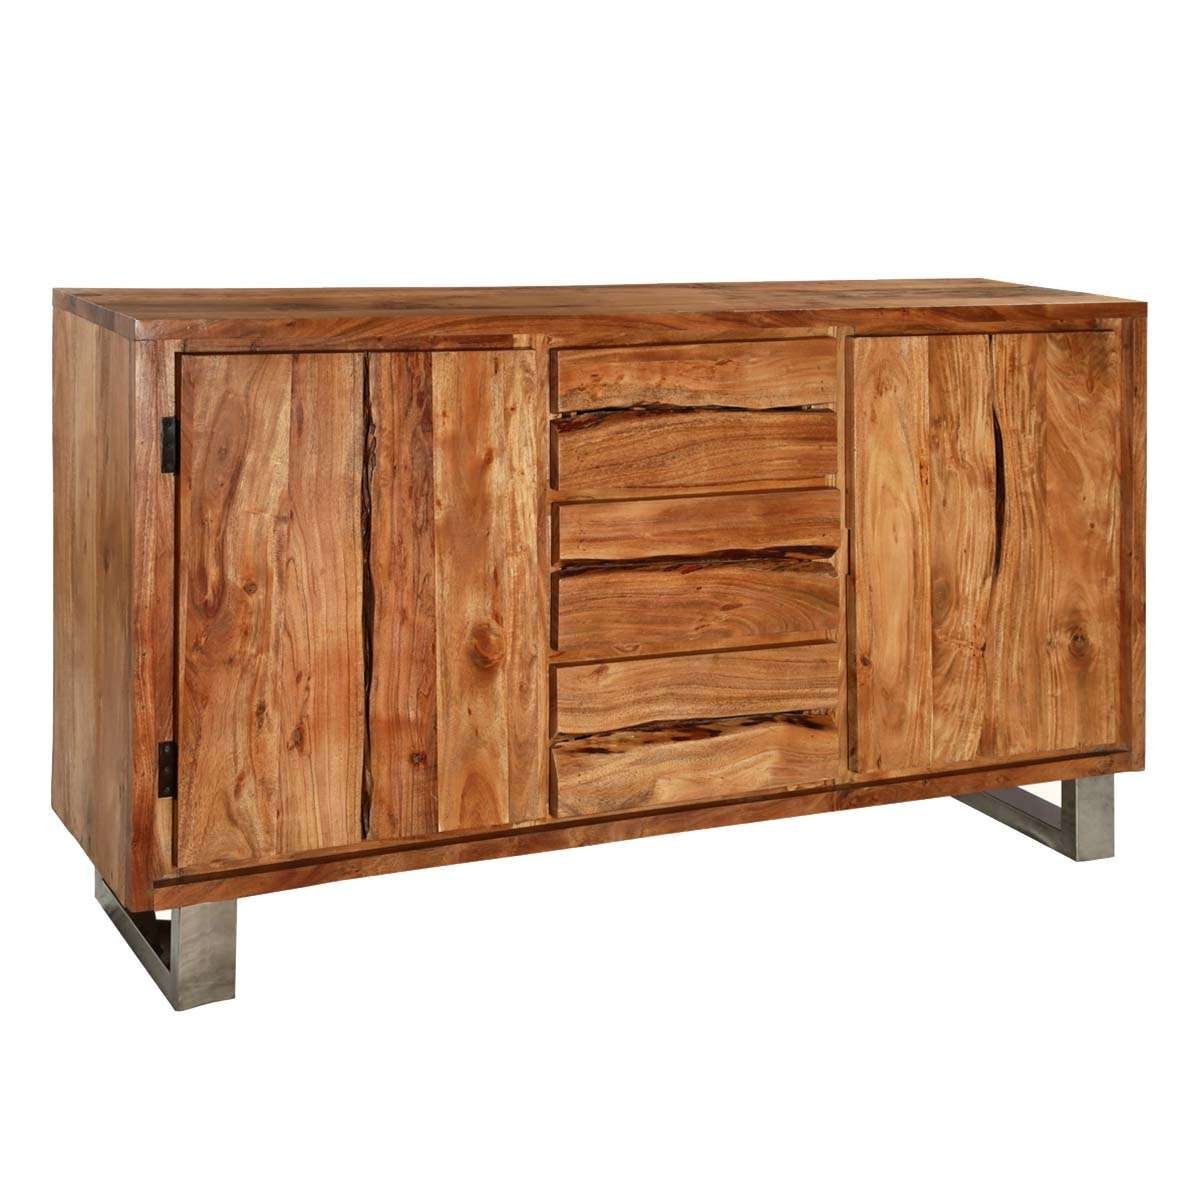 Pioneer Acacia Wood Live Edge 3 Drawer Sideboard Cabinet For Real Wood Sideboards (View 12 of 20)